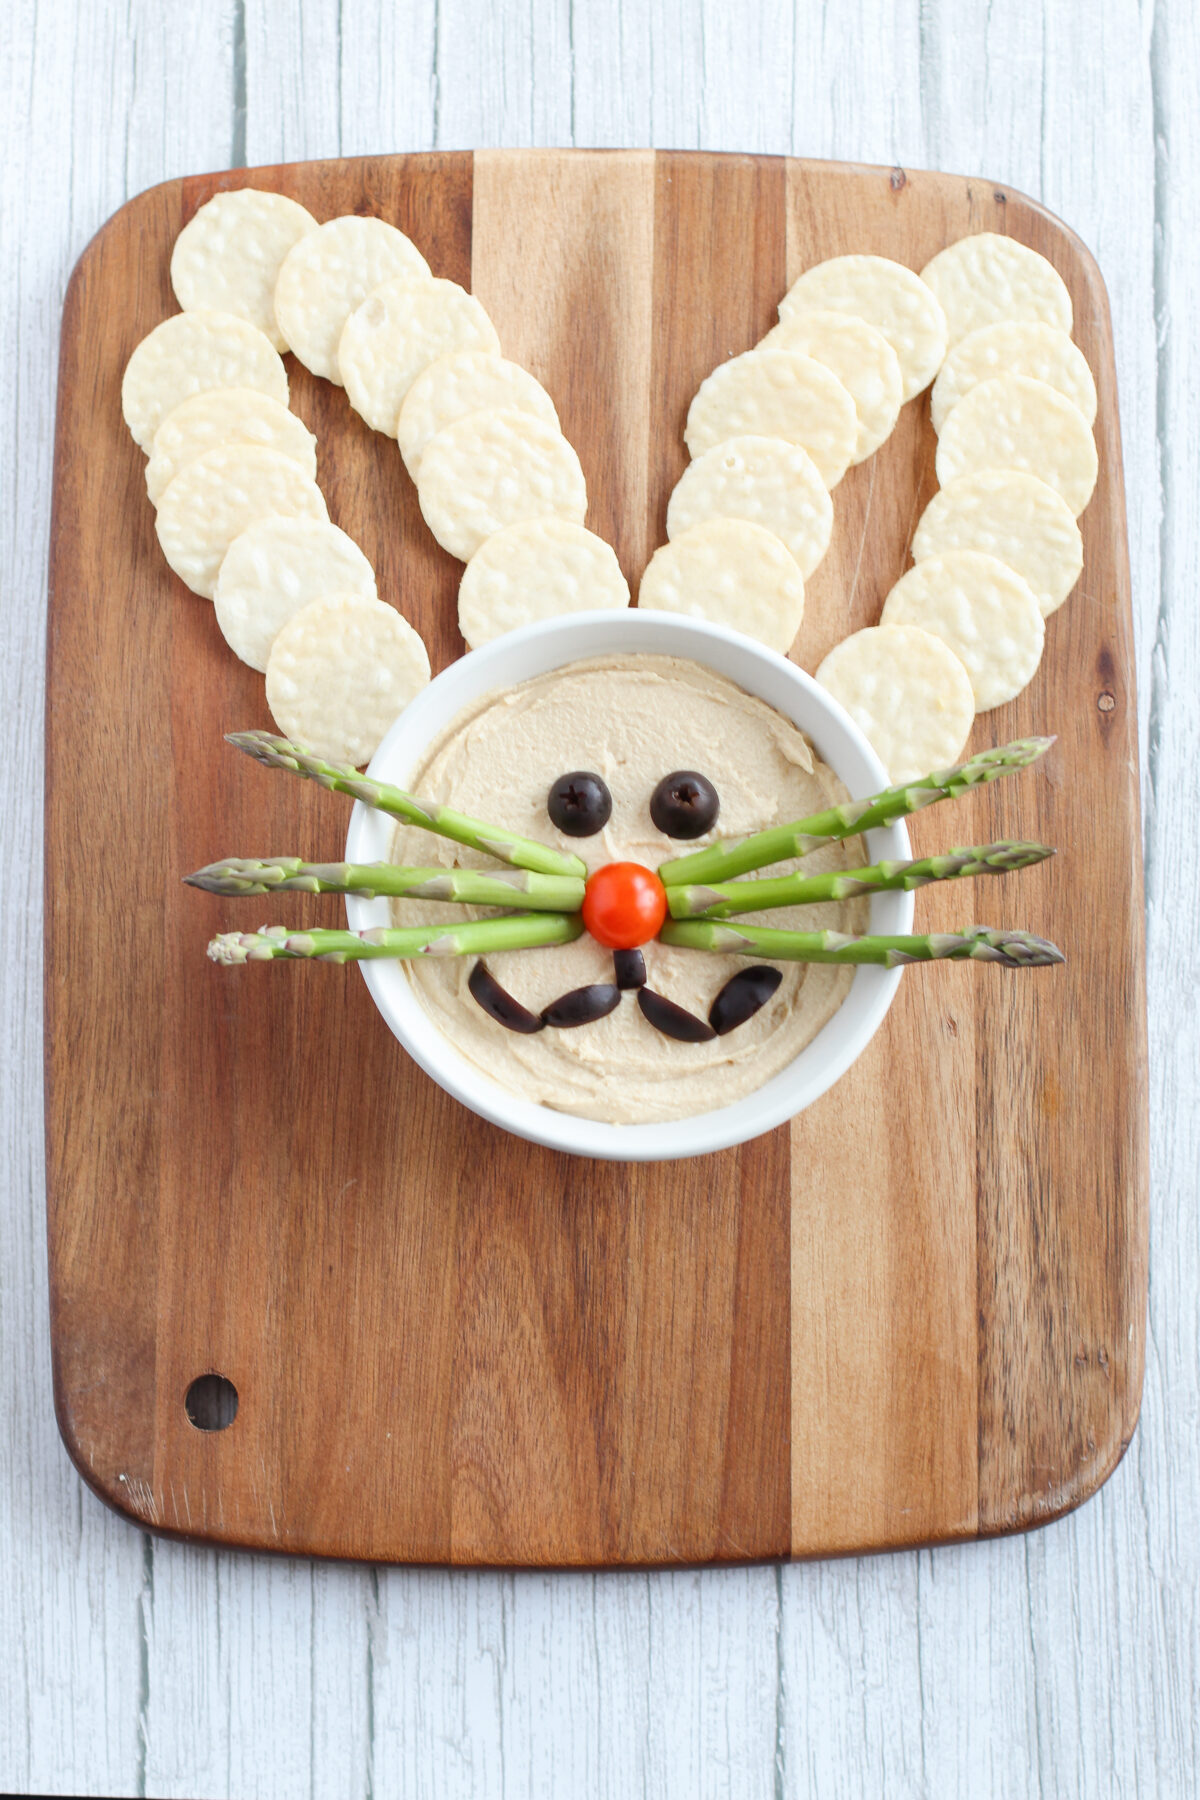 Bunny faced created with vegetables.